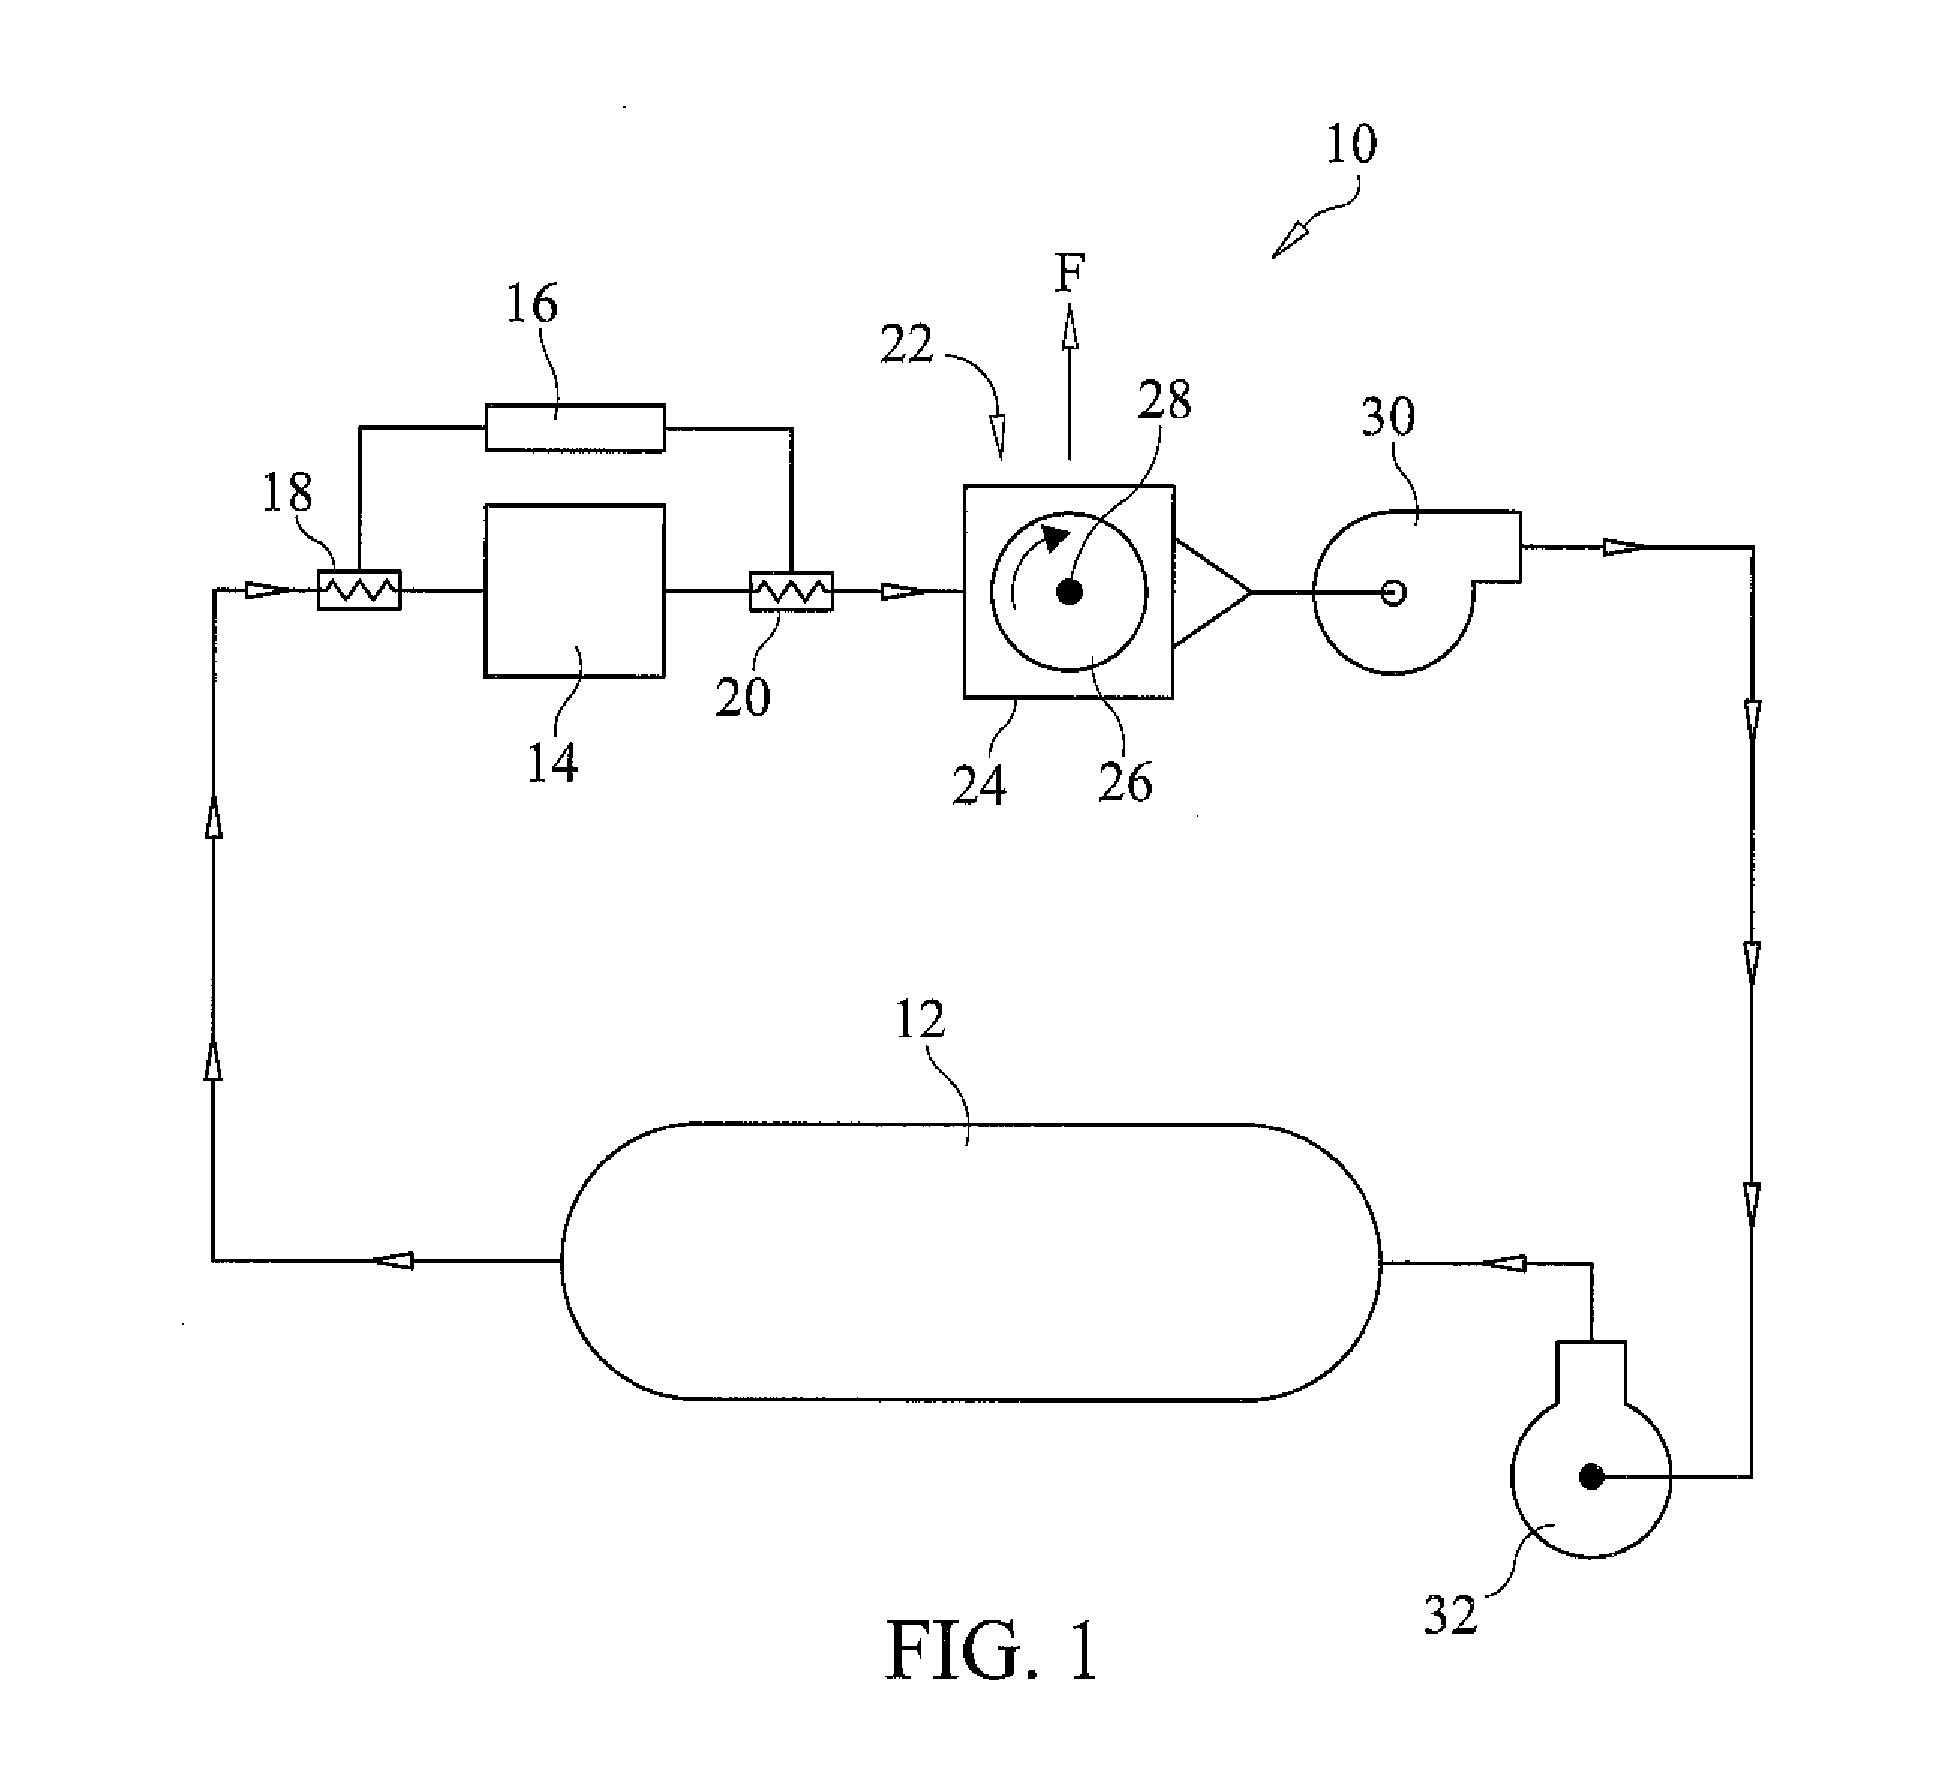 Compressed air vehicle having enhanced performance through use of magnus effect